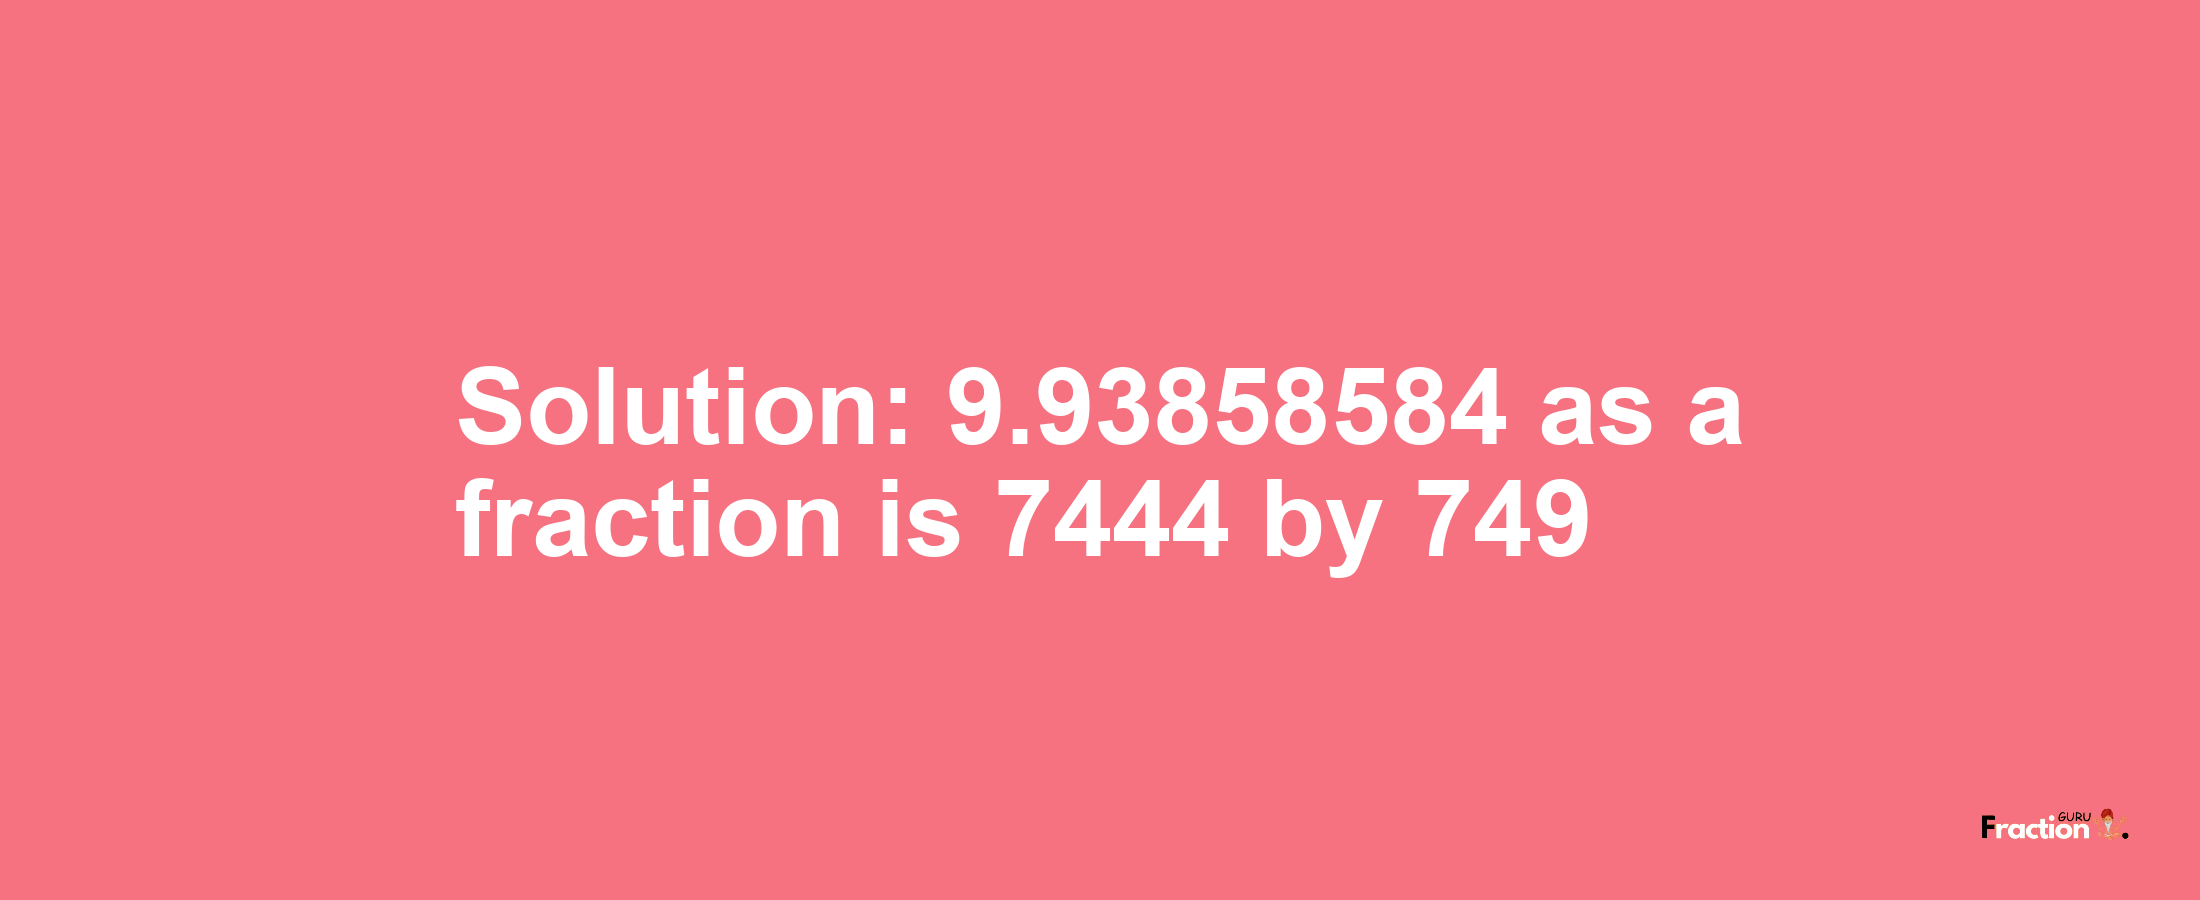 Solution:9.93858584 as a fraction is 7444/749